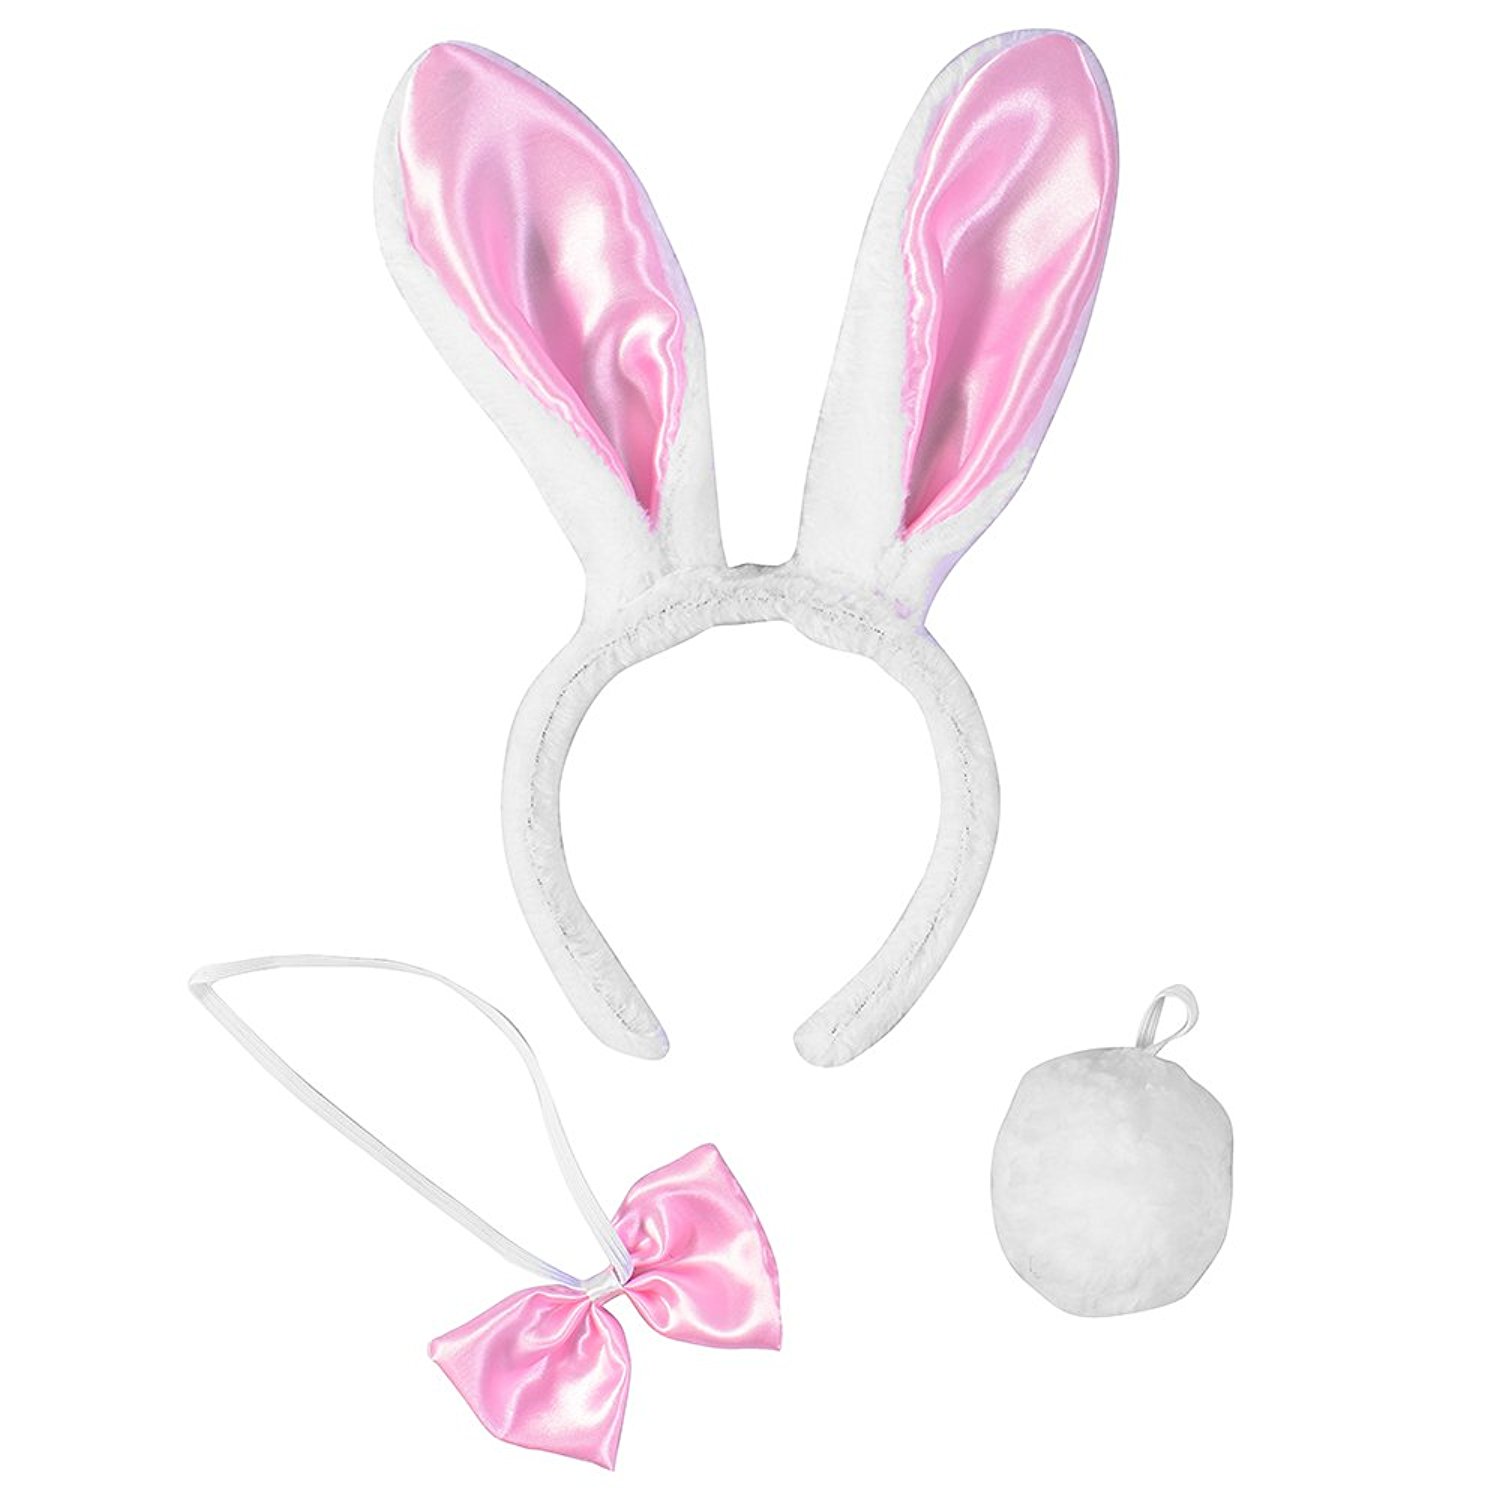 Amazon.com: Bunny Ears and Tail w/ Bow - Easter Costume - Bunny ...